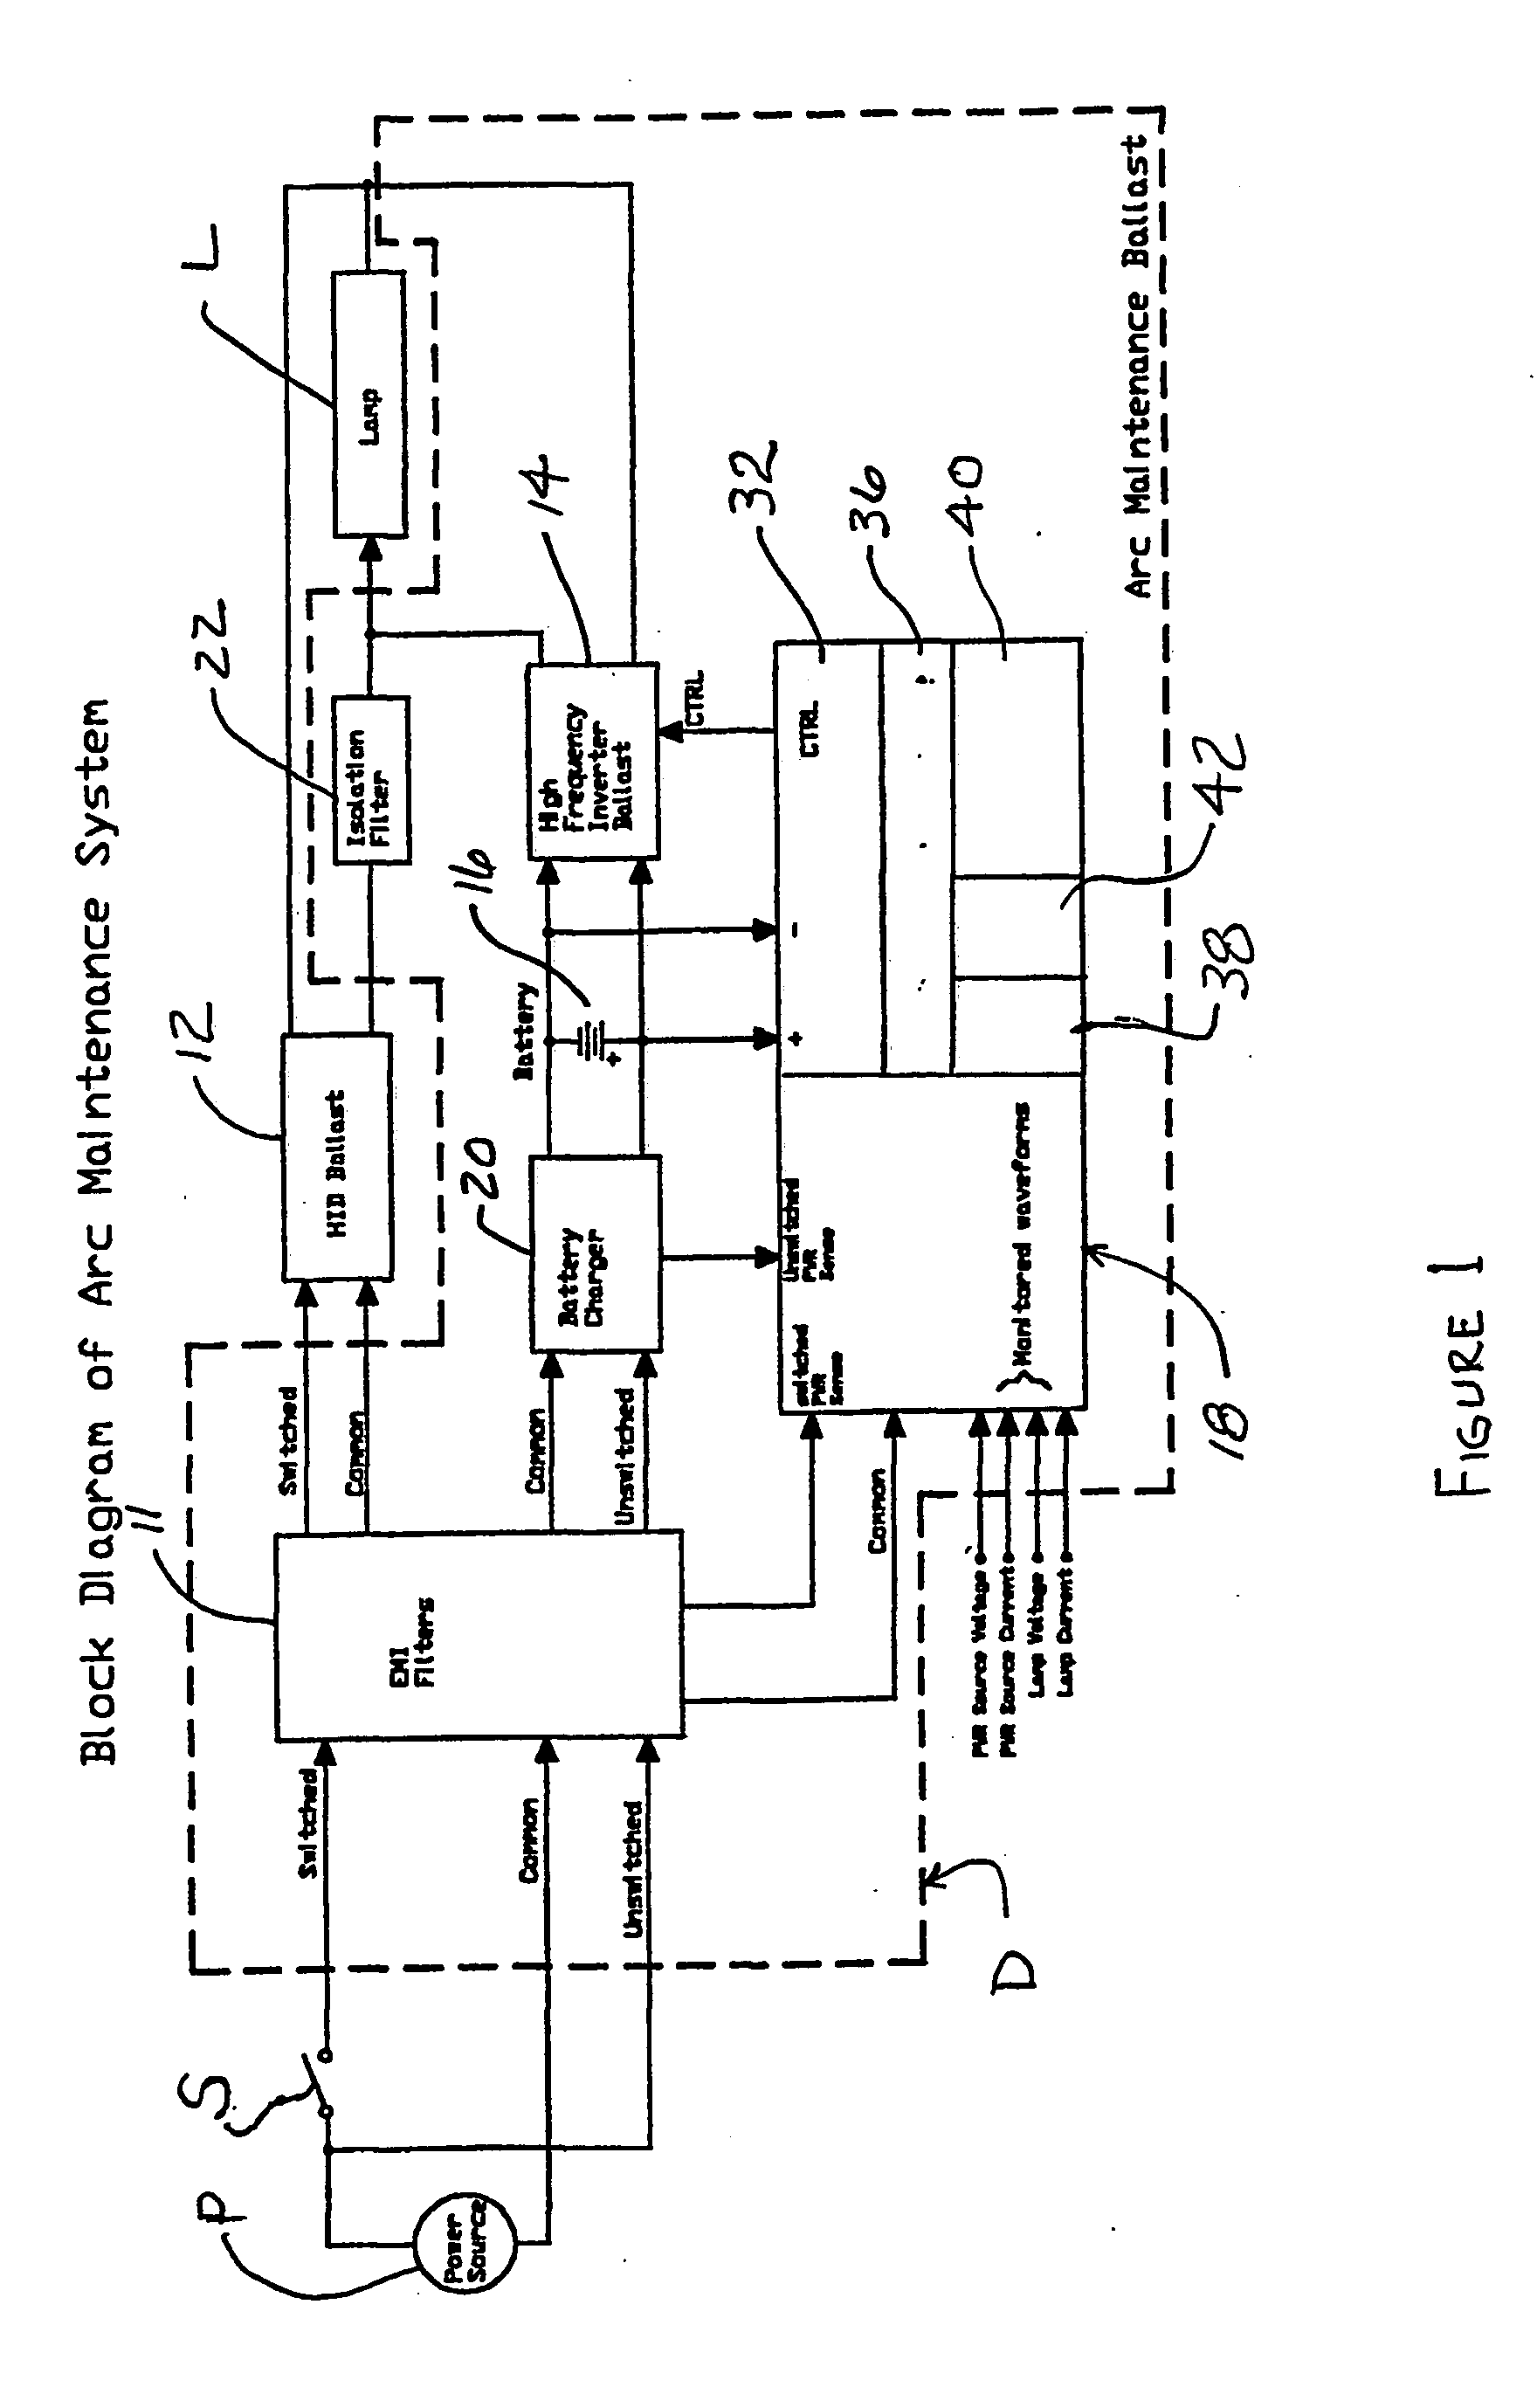 Arc maintenance device for high density discharge lamps including an adaptive wave form monitor